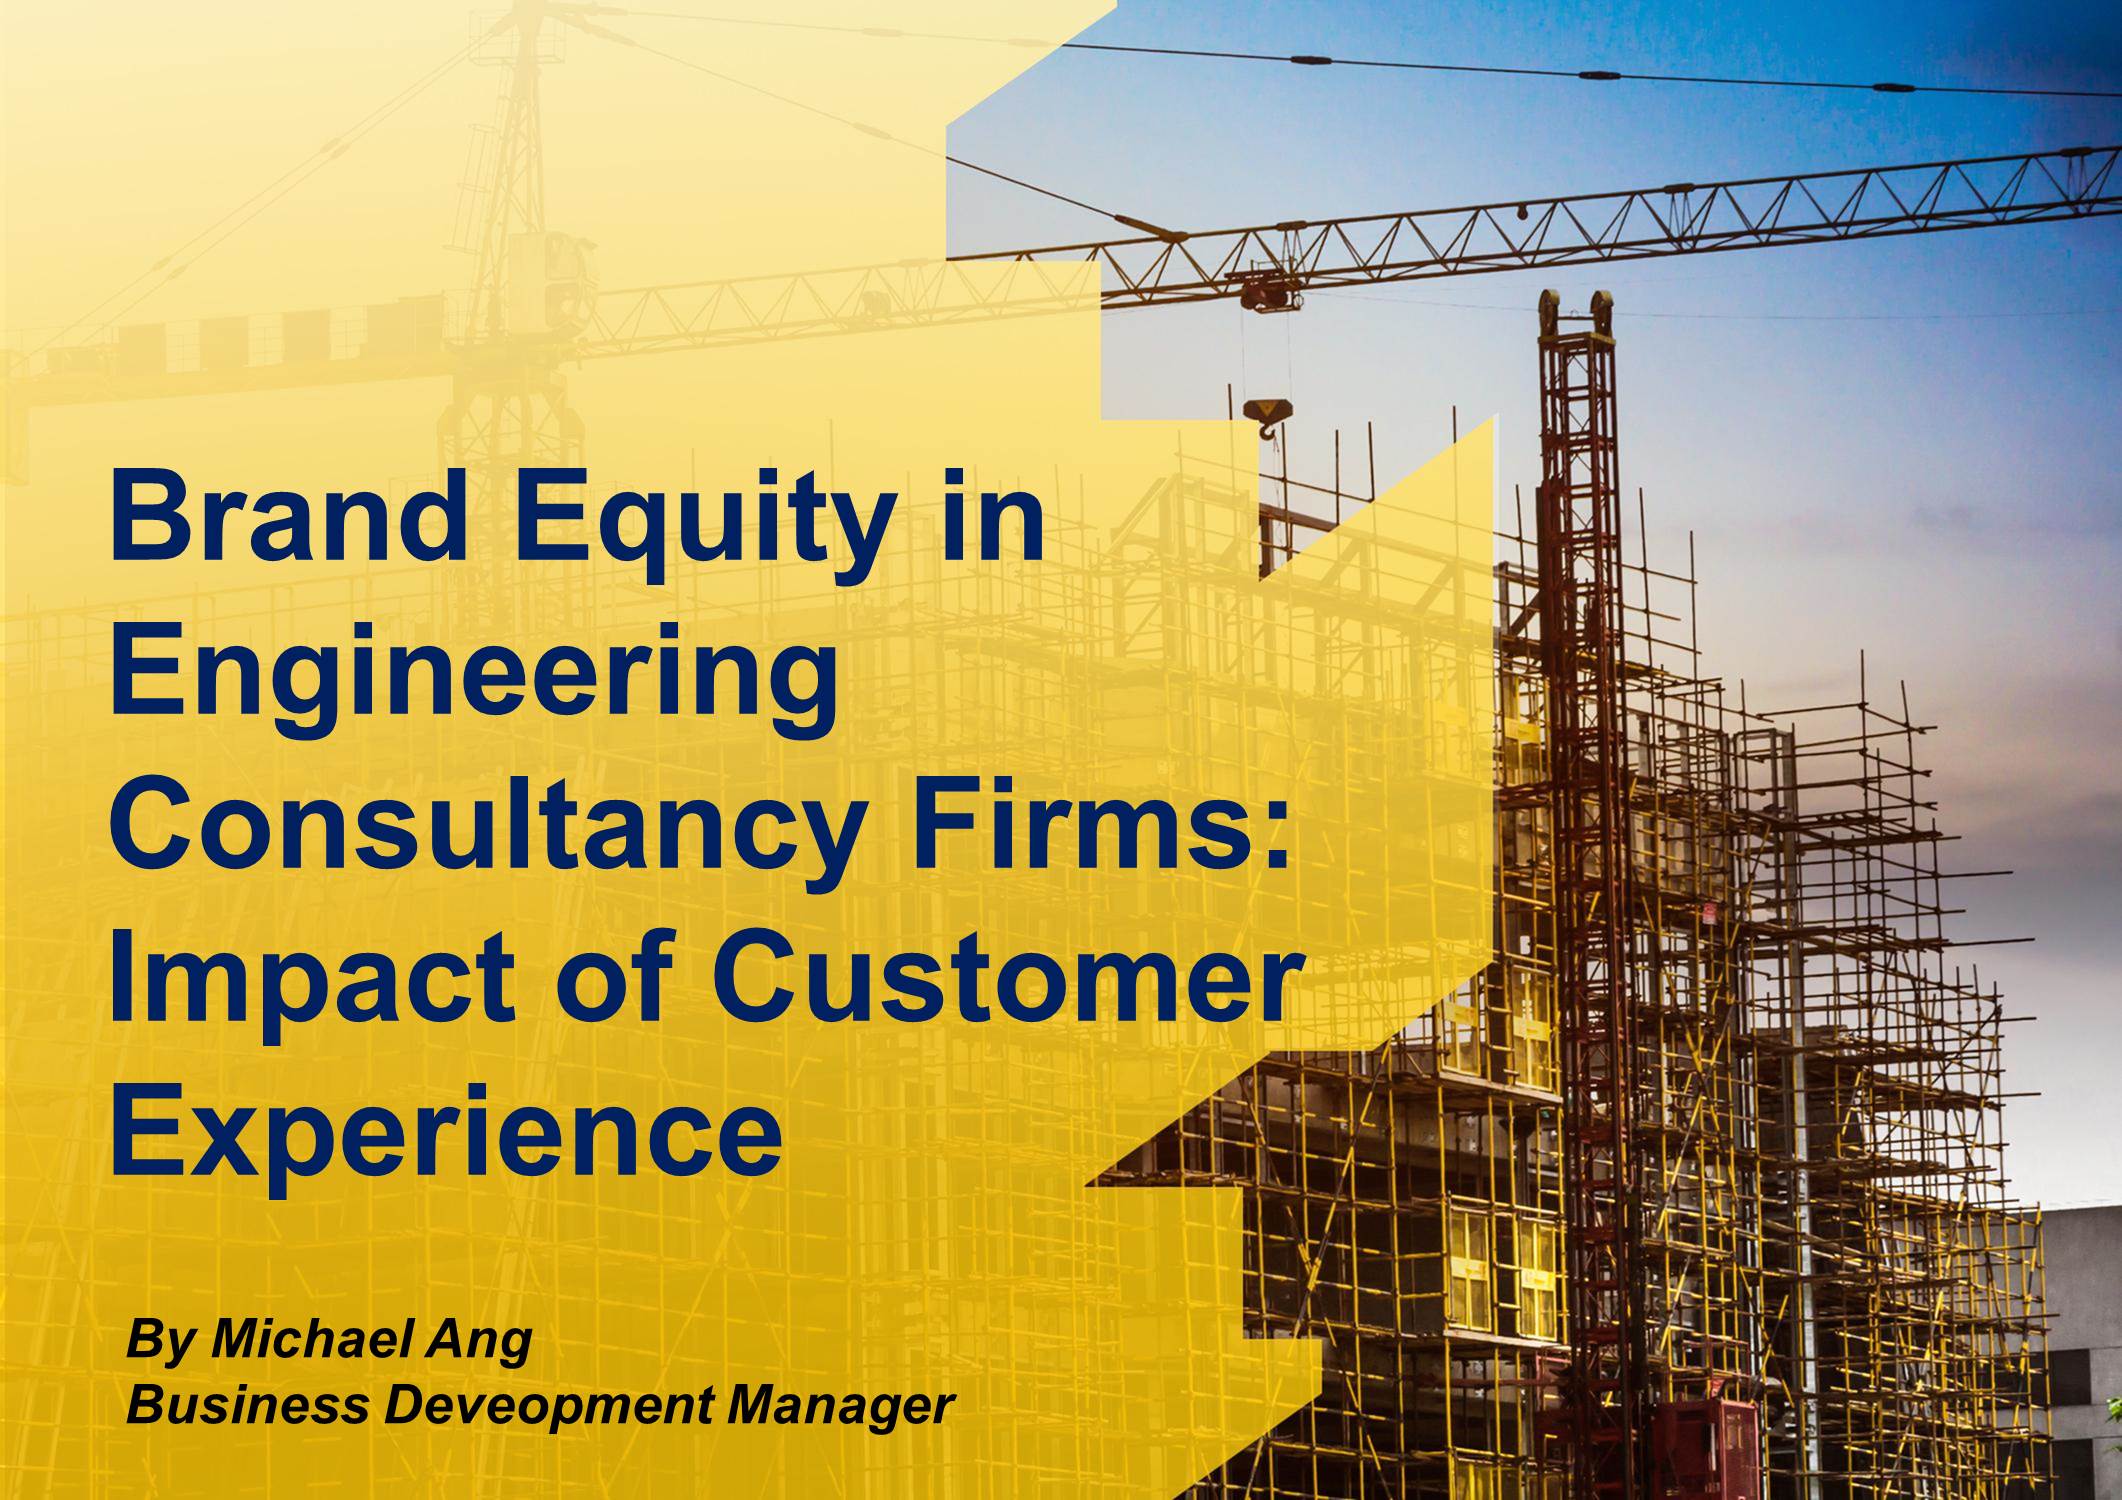 Brand Equity in Engineering Consultancy Firms - Impact of Customer Experience